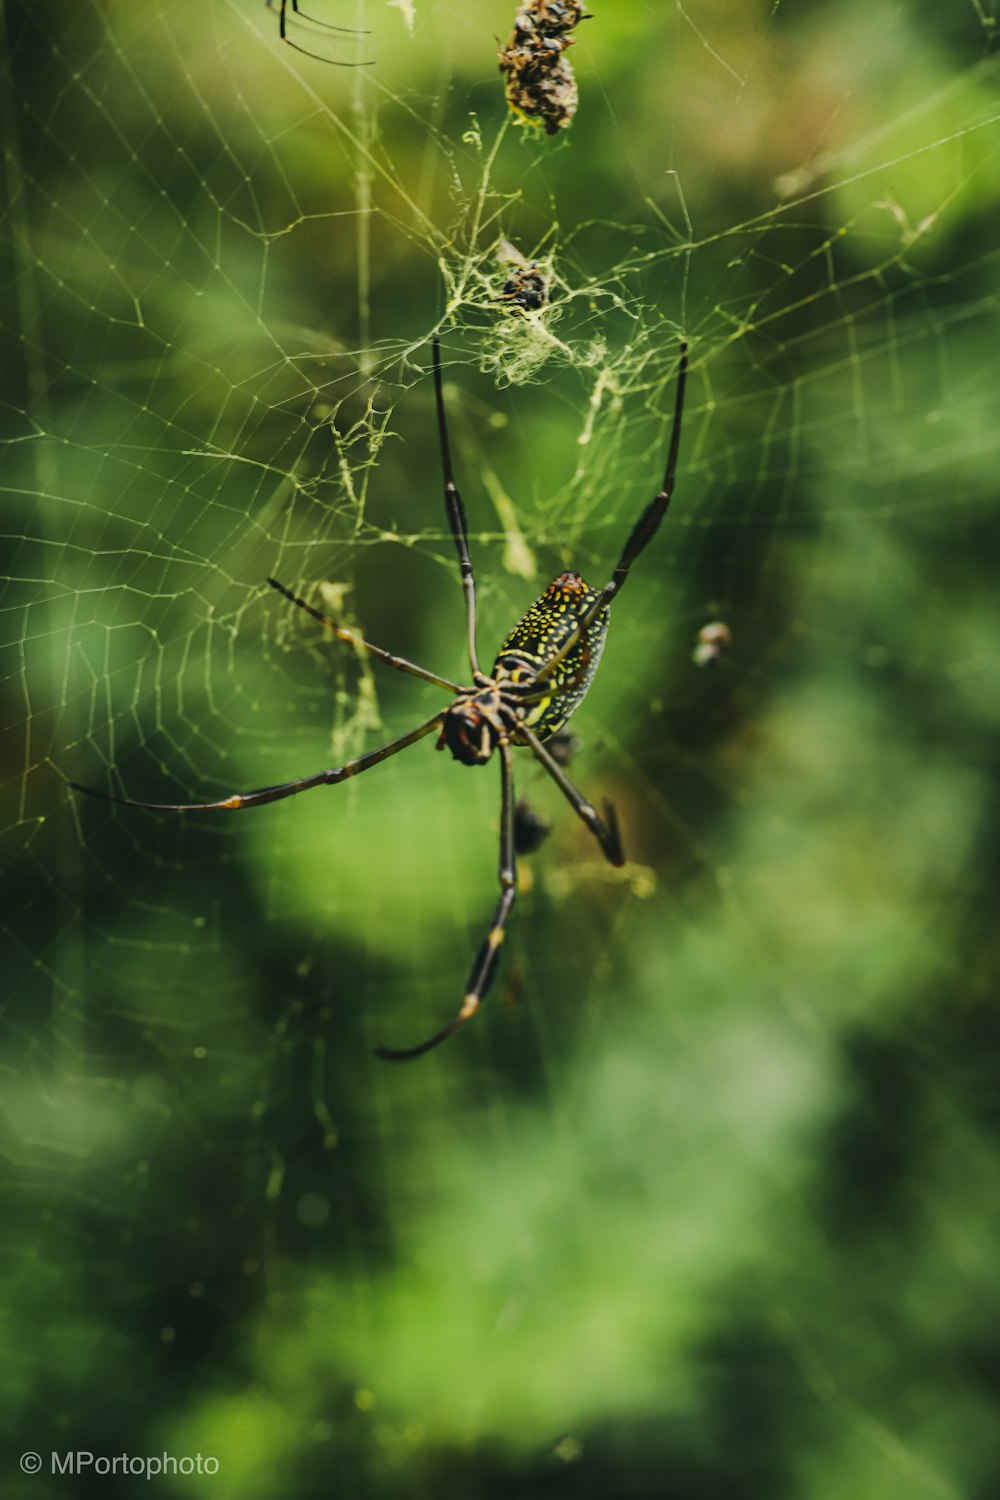 black and yellow spider on web in close up photography during daytime